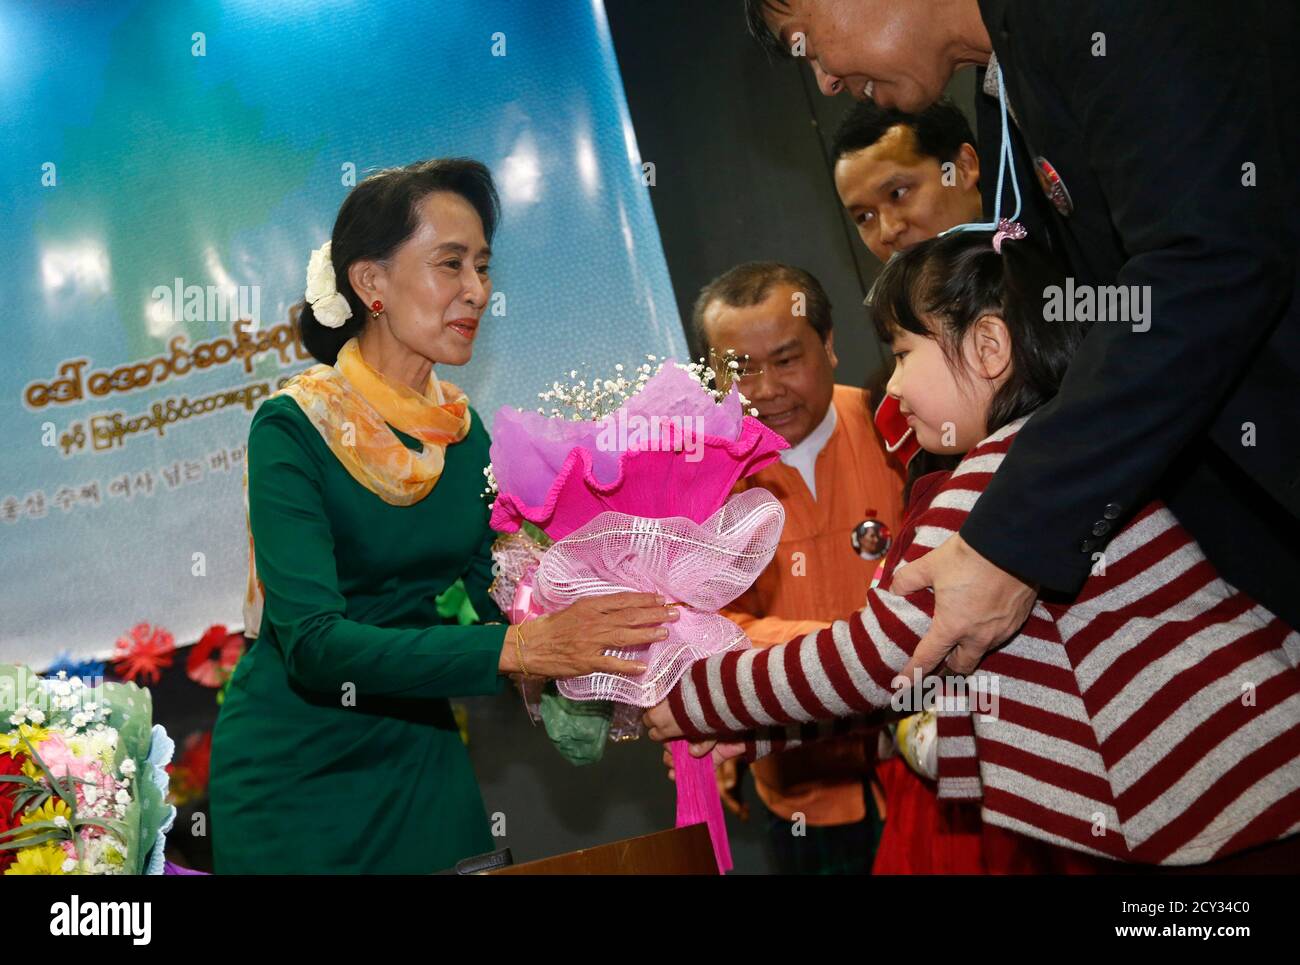 A Child From Myanmar Presents A Bouquet Of Flowers To Visiting Myanmar Opposition Leader Aung San